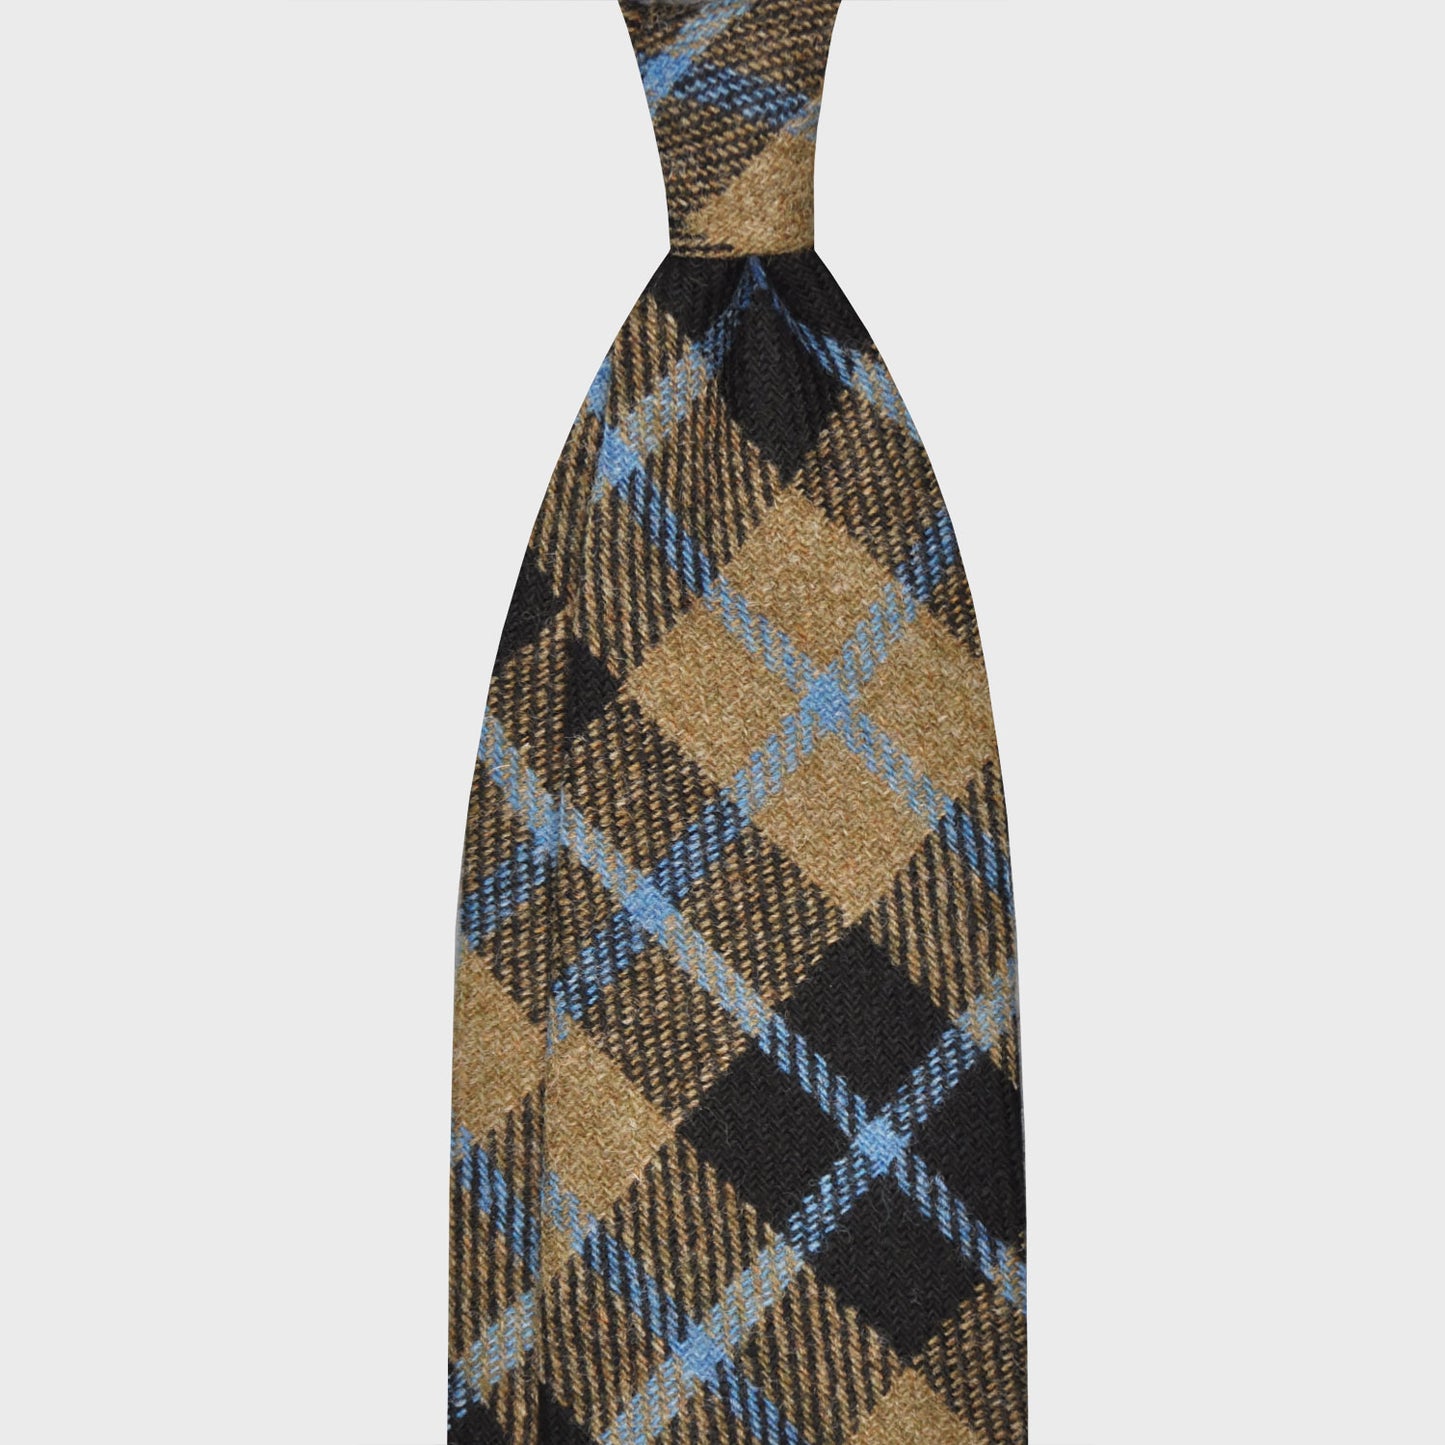 Camel Plaid Checks Wool Tweed Unlined Handmade Tie. Unlined wool tie, hand rolled edge, 100% wool tweed, light weight, soft texture to the touch, bristly feeling, F Marino ties for Wools Boutique Uomo, camel and dark blue checks pattern